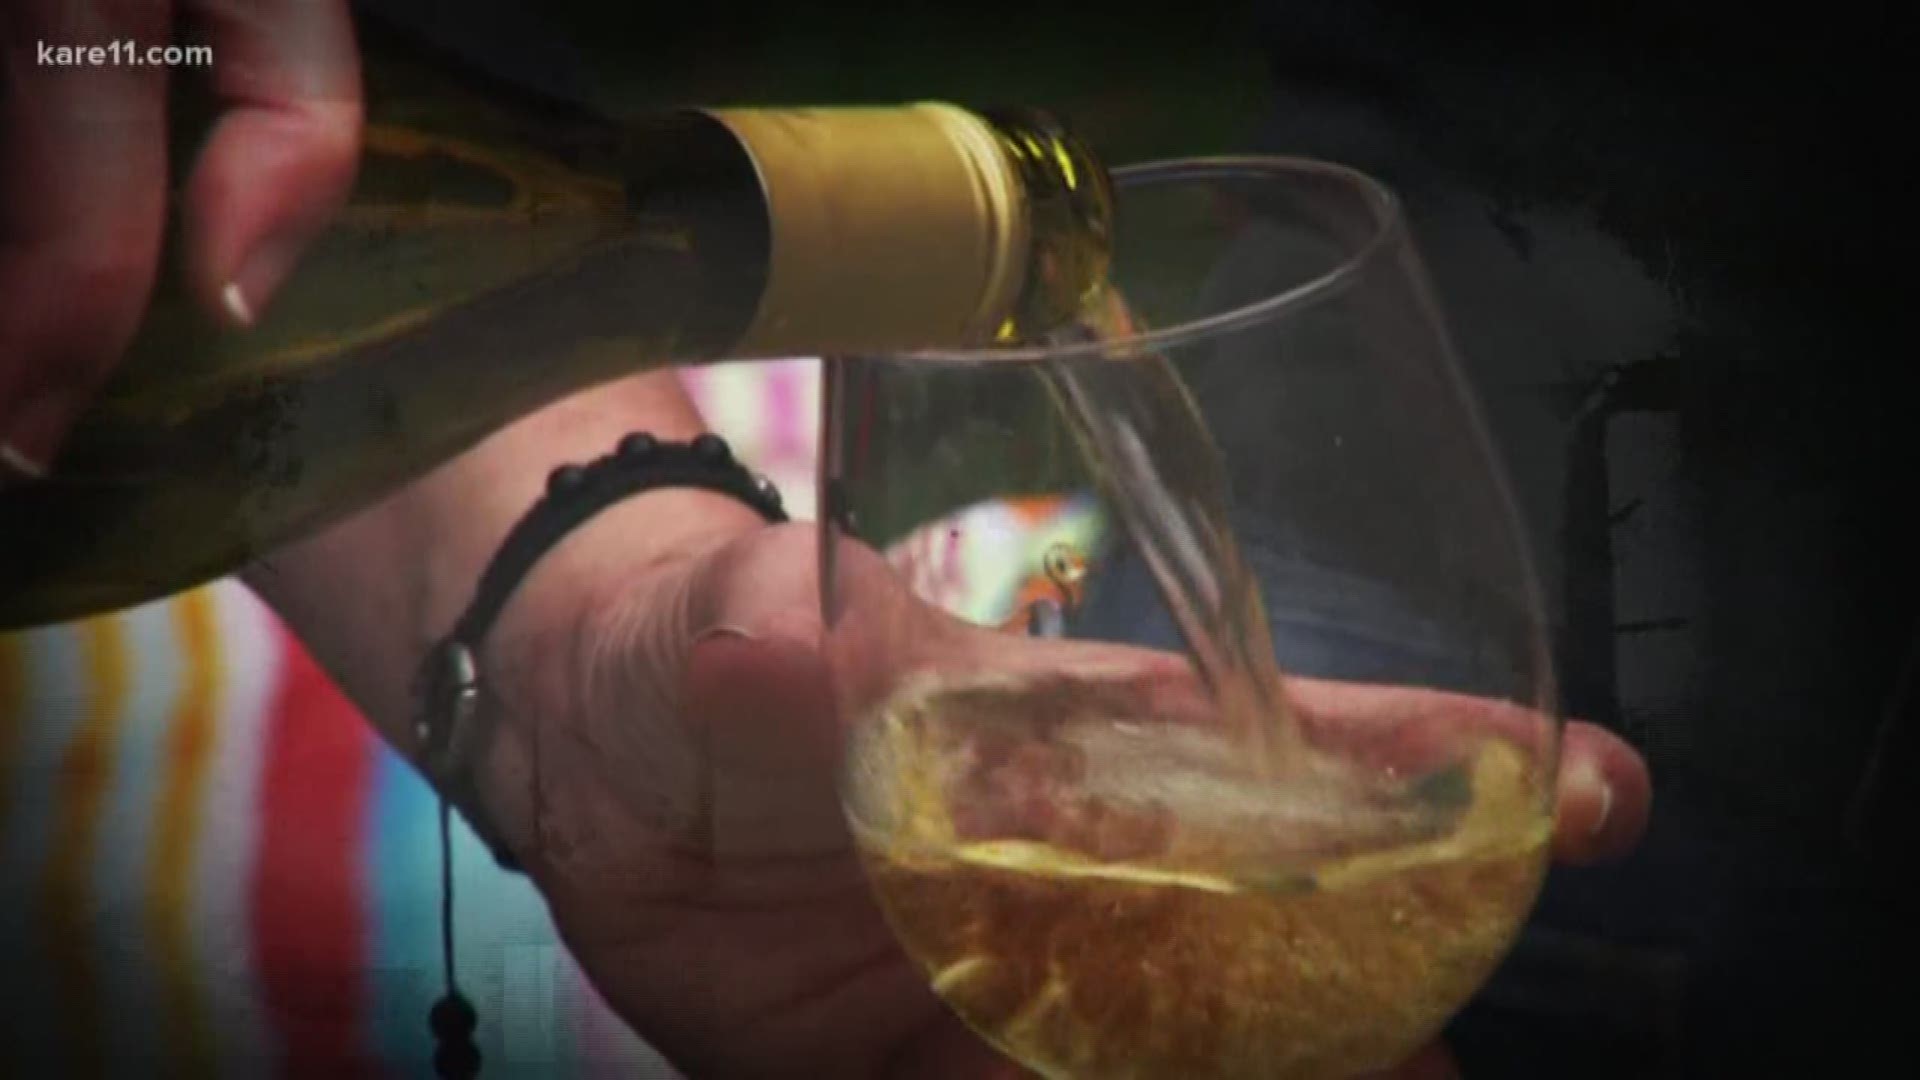 It's no secret that restaurants mark up their wine, but the question is how much? And, if you knew, would it change your dining habits? A pair of local restaurateurs are betting that it will. https://kare11.tv/2JQgr1D